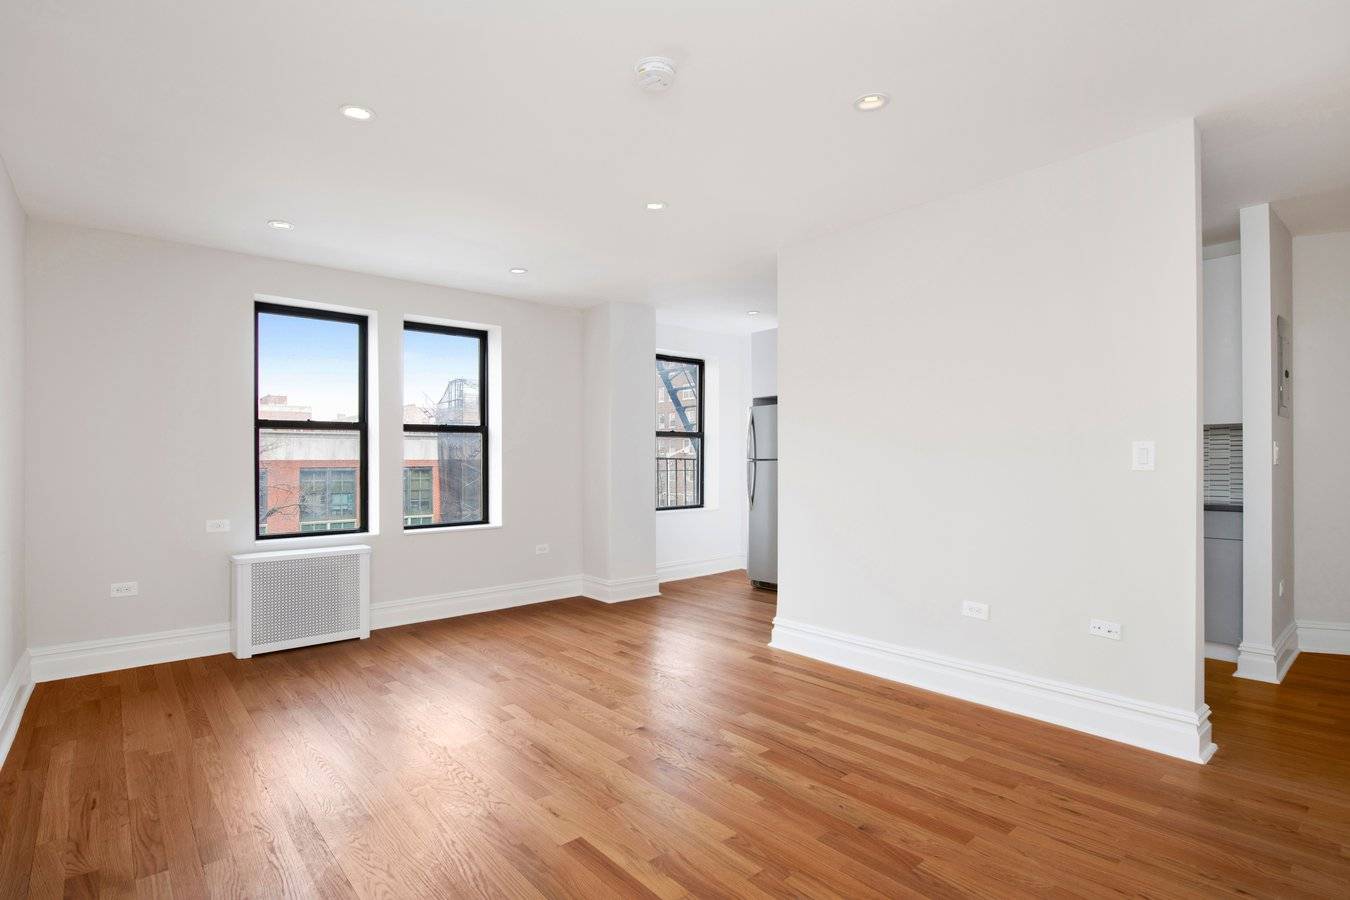 Modern, gut renovated one bedroom, one bath apartment featuring new oak hardwood floors, a large living room, separate kitchen with Quartz counter tops, abundant cabinet space, stainless steel appliances and ...